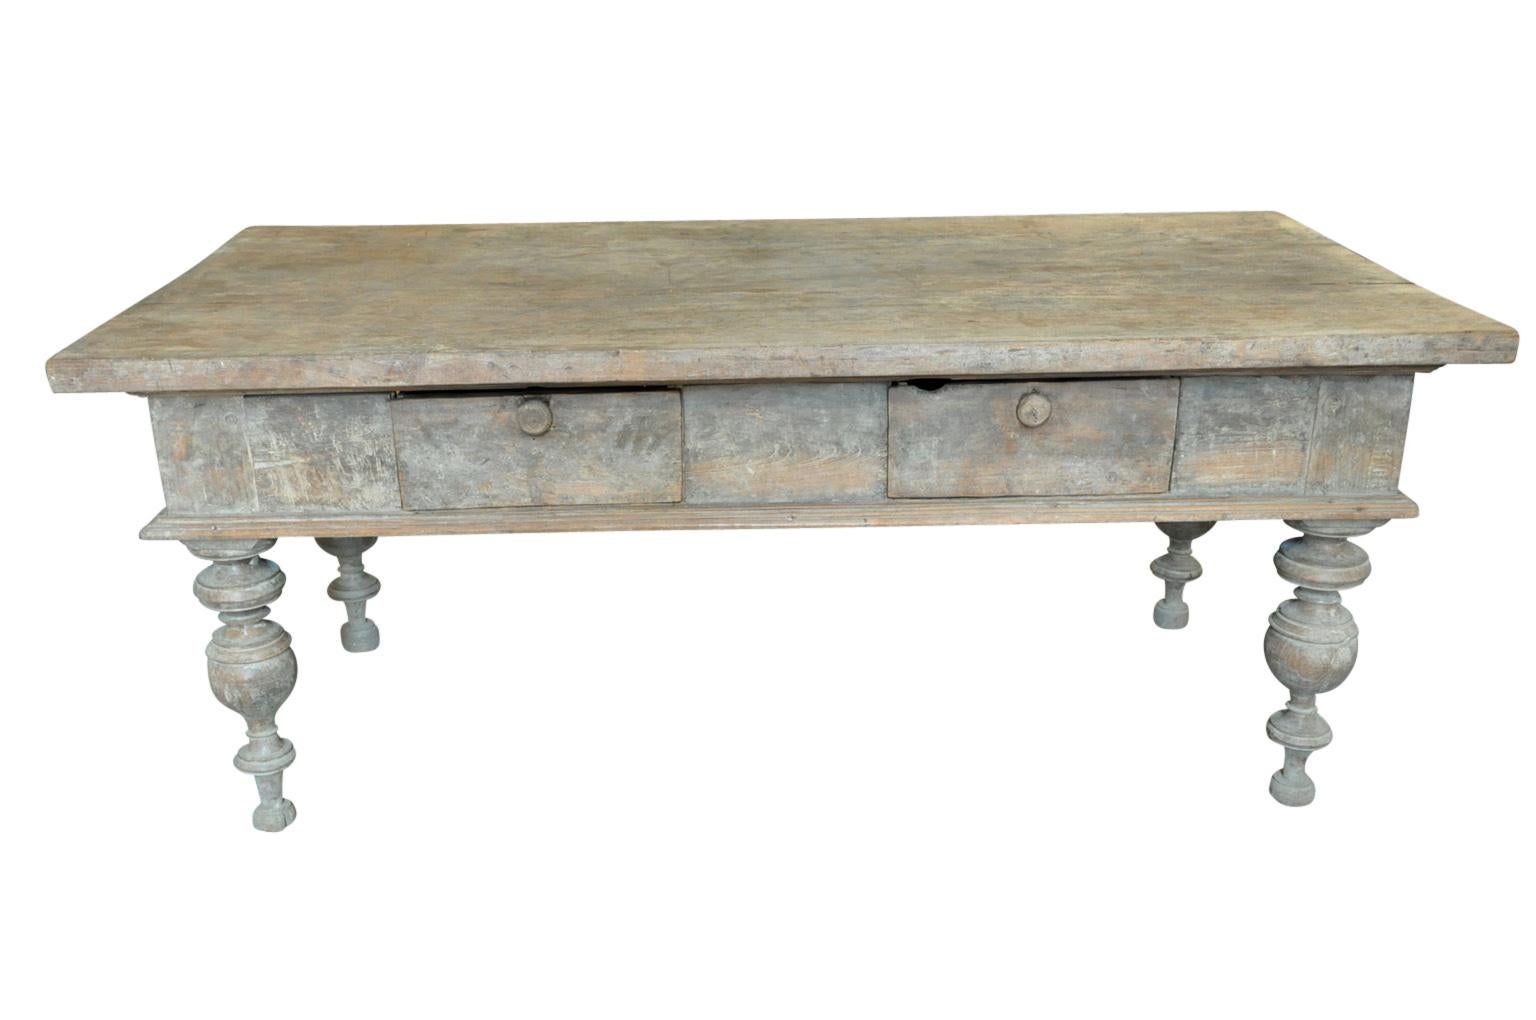 An outstanding 17th century Reflectoire Table from Northern Italy. Soundly constructed from walnut with very handsome turned legs, a very thick top plank and two drawers. Wonderful patina and tone. A tremendous piece to serve as a grand sofa table